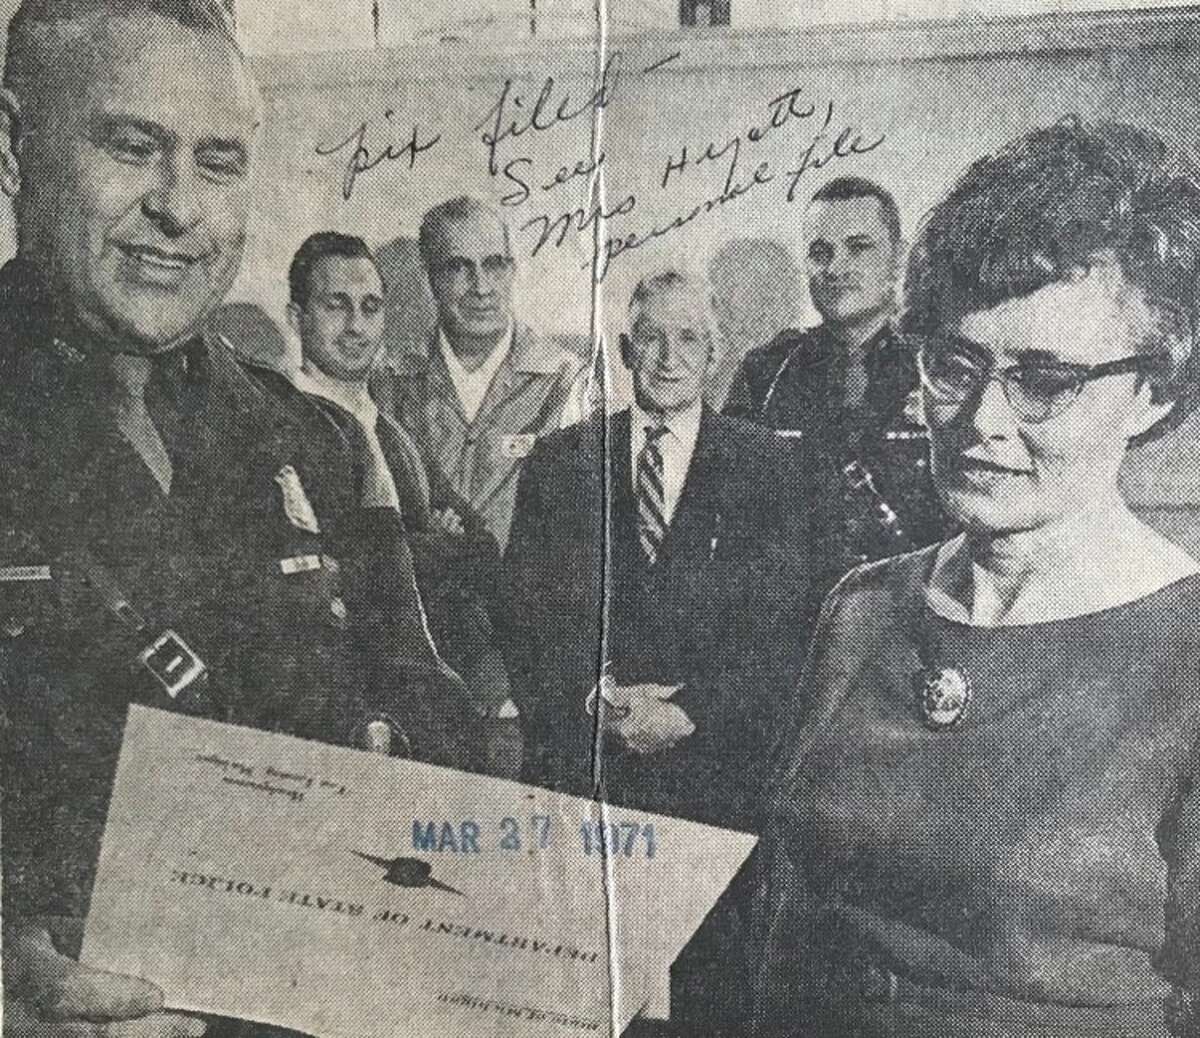 Mrs. Russell Hyatt of South Homer Road, receives a life saving certificate from Sgt. Daniel Kostrzewa, commander of the Mount Pleasant State Police post in recognition for saving the life of Penny Corwin, daughter of State Police Trooper George Corwin from drowning in the Chippewa River. Looking on, from left, are Barryton residents Jerry Wyan, Gerald Sherman and Edward Schade, who are credited with assisting Hyatt, and Trooper Corwin. Hyatt is a nurse at Midland Hospital. March 1971